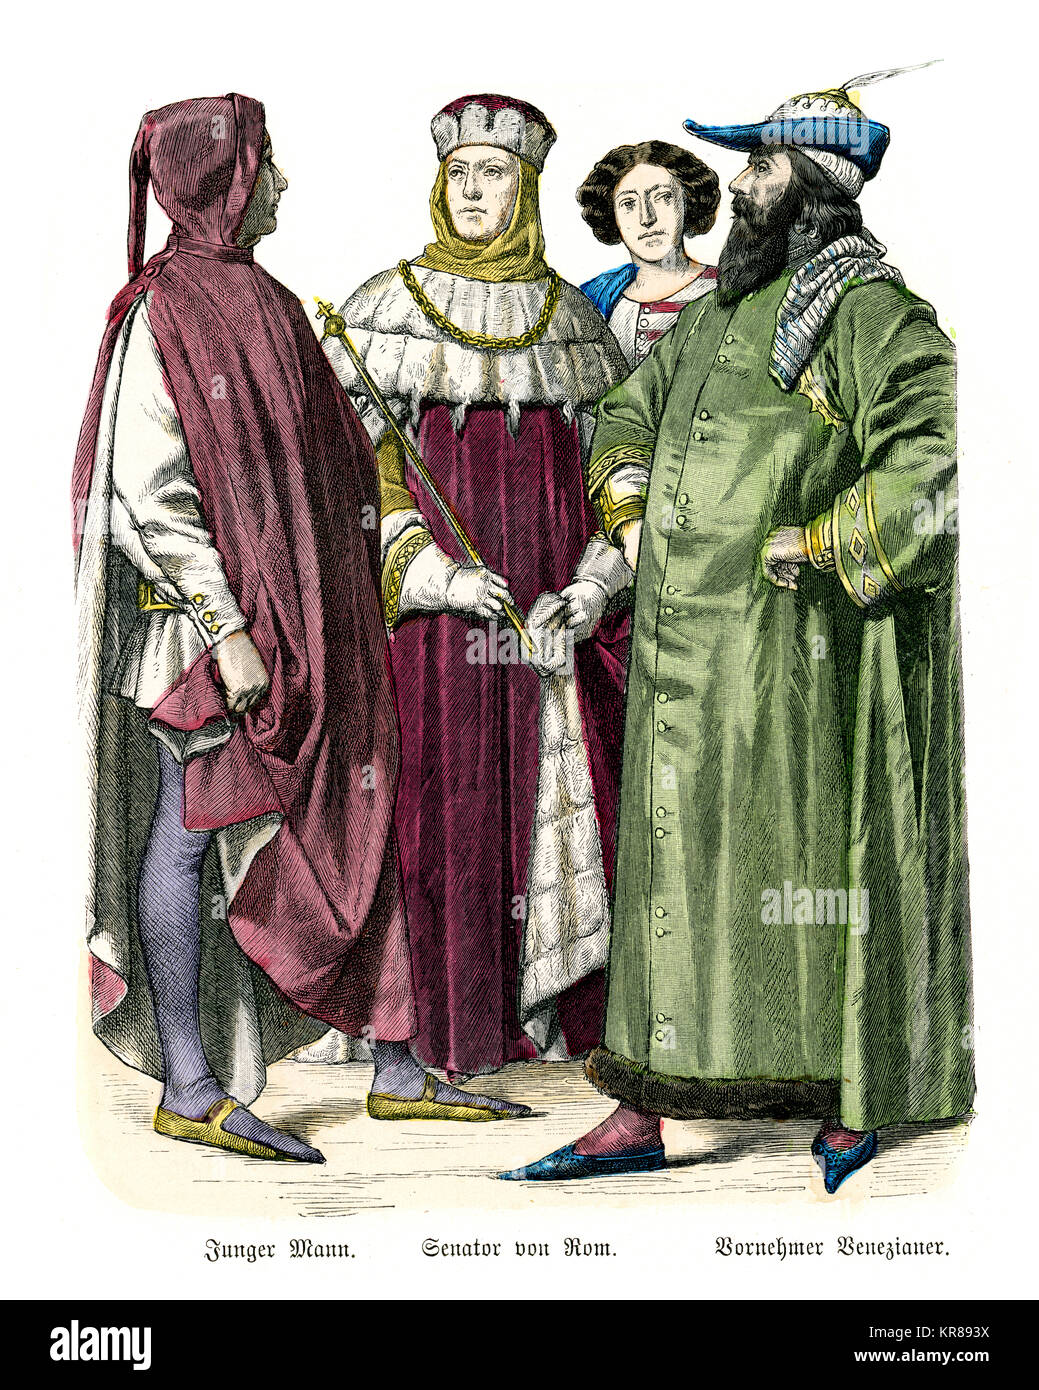 Vintage engraving of Mens Fashions of Medieval Italy, 14th Century. Young man, senator from Rome, Venetian Stock Photo